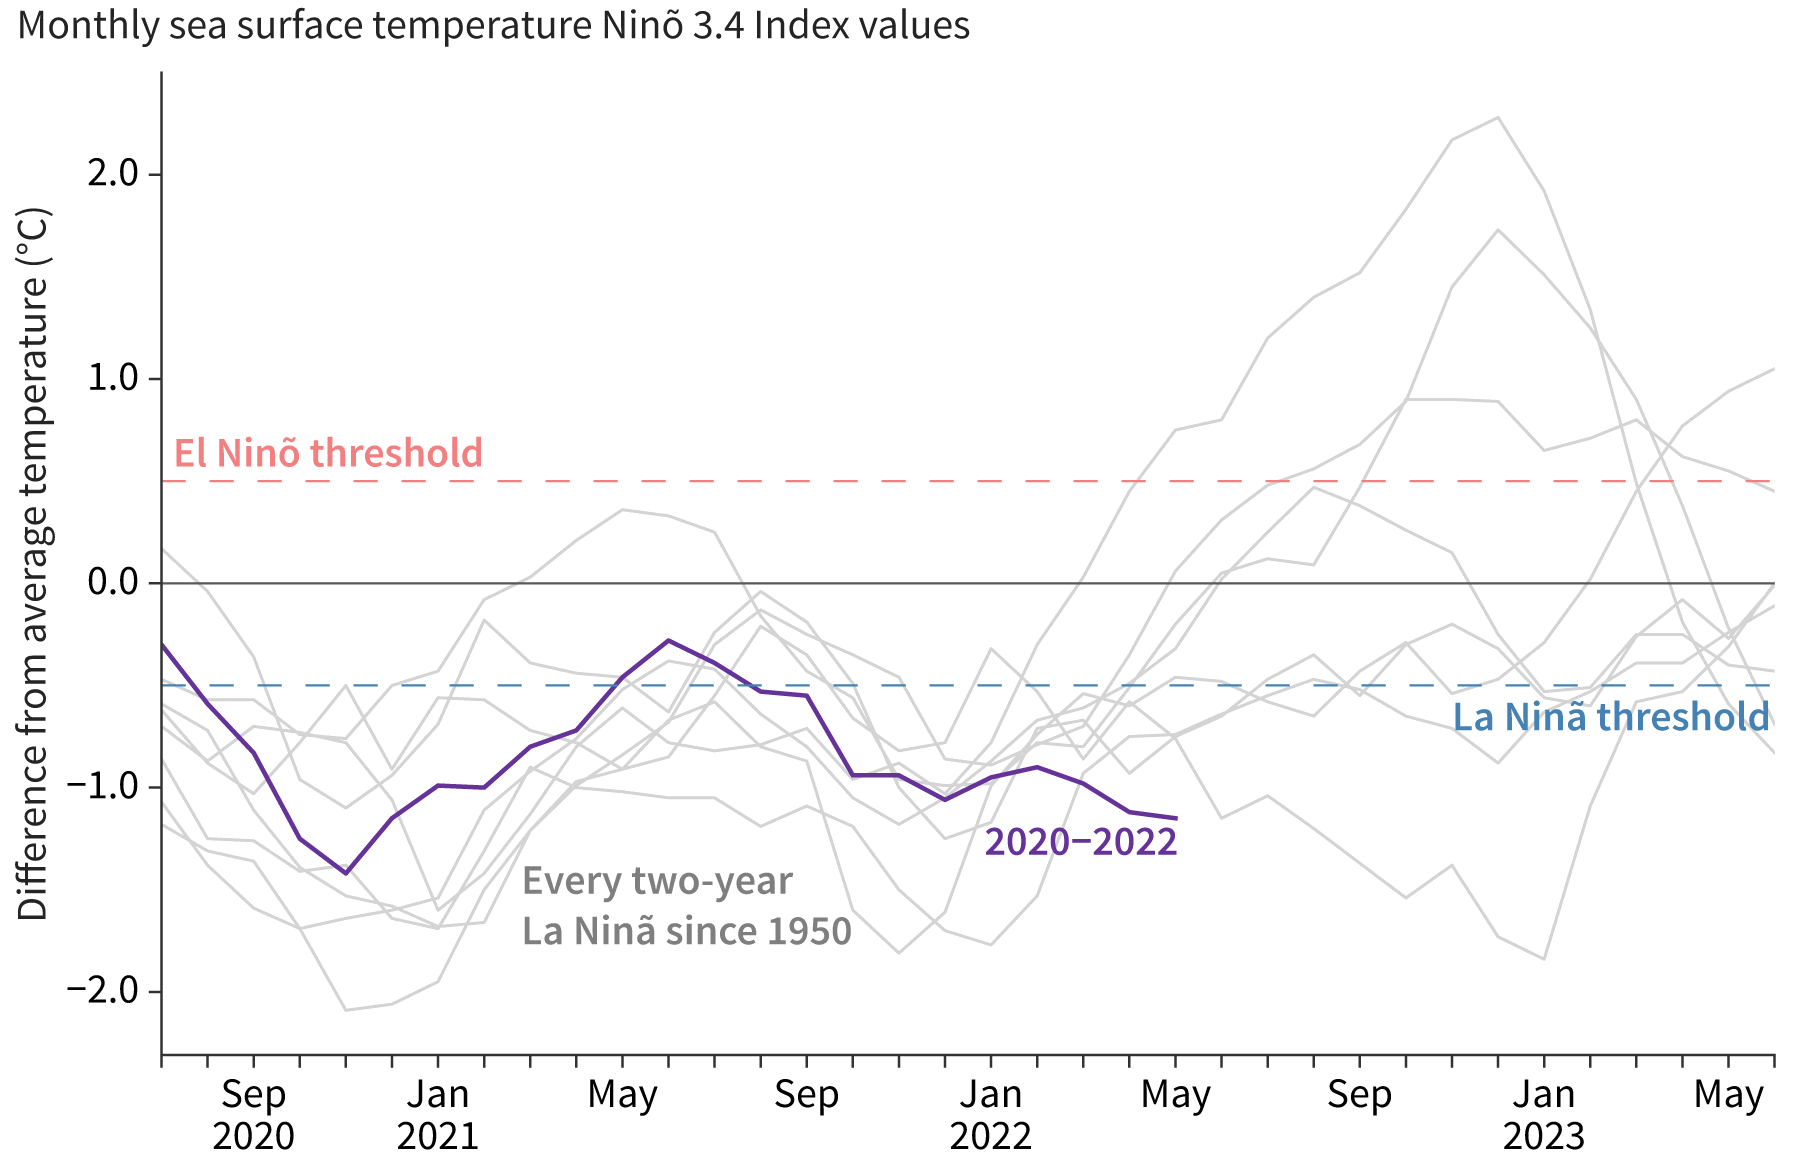 enso-climate-graph-noaa-united-states-2022-cold-warm-weather-season-historical-data